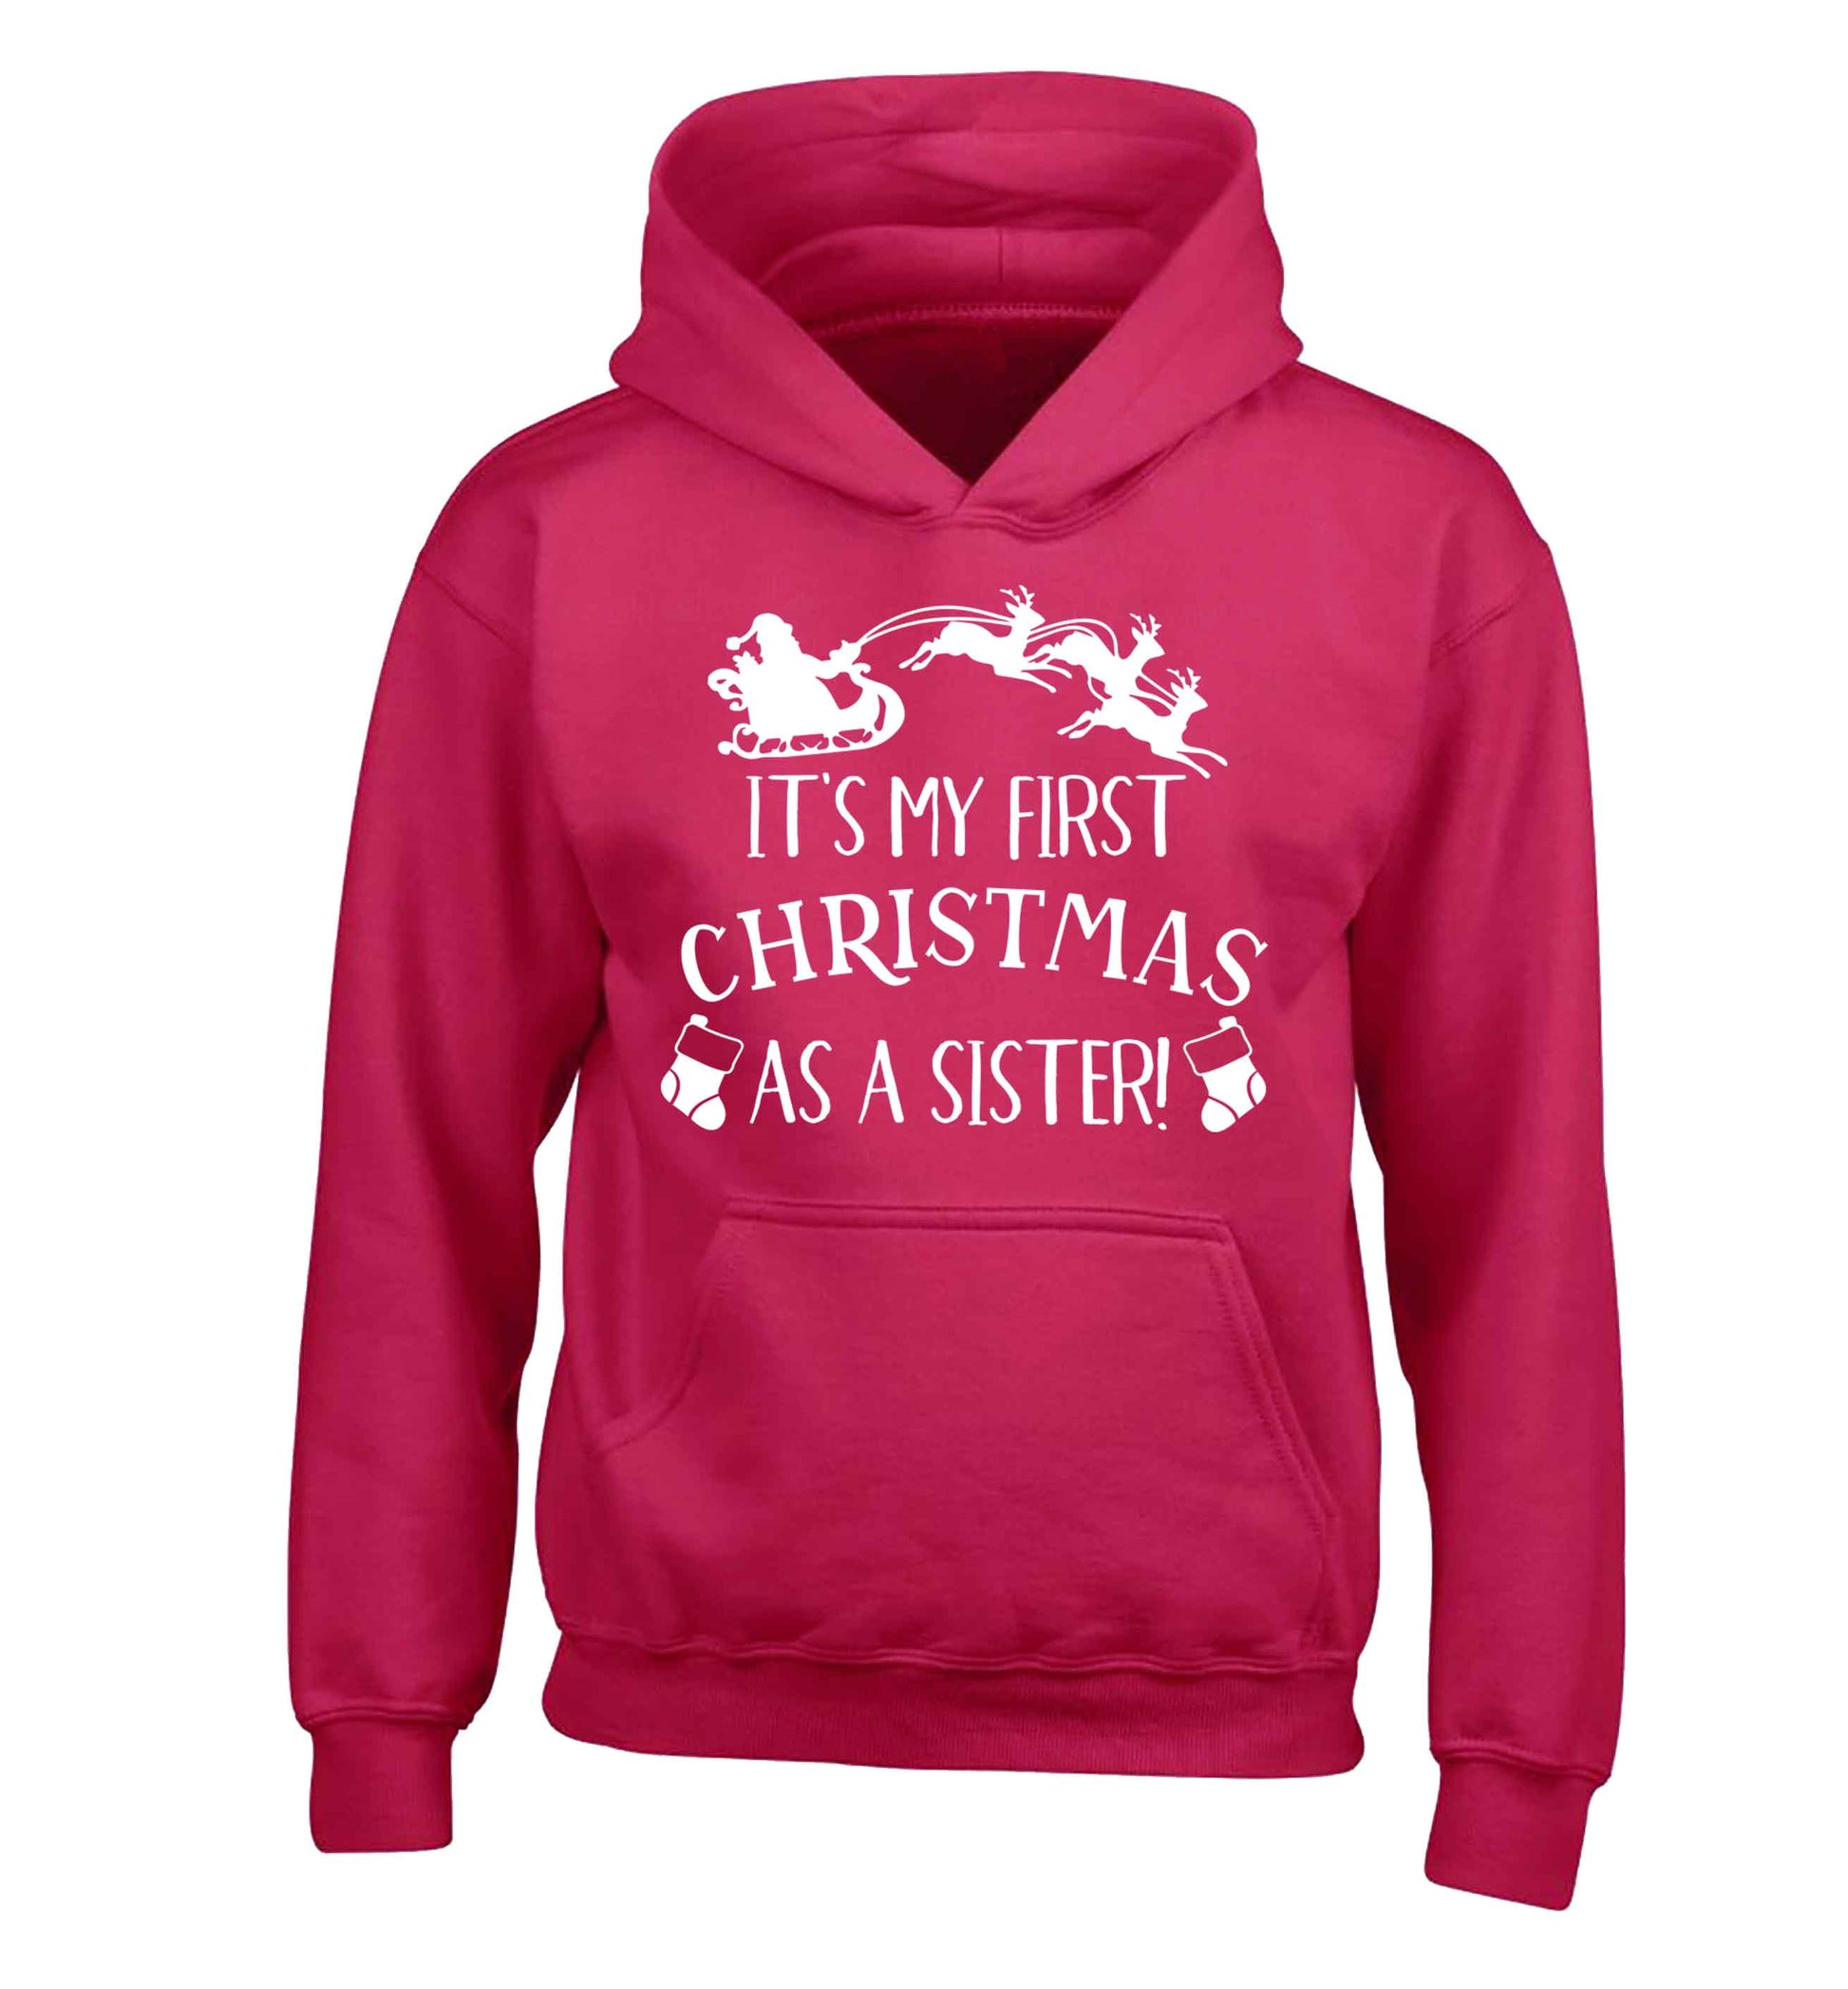 It's my first Christmas as a sister! children's pink hoodie 12-13 Years